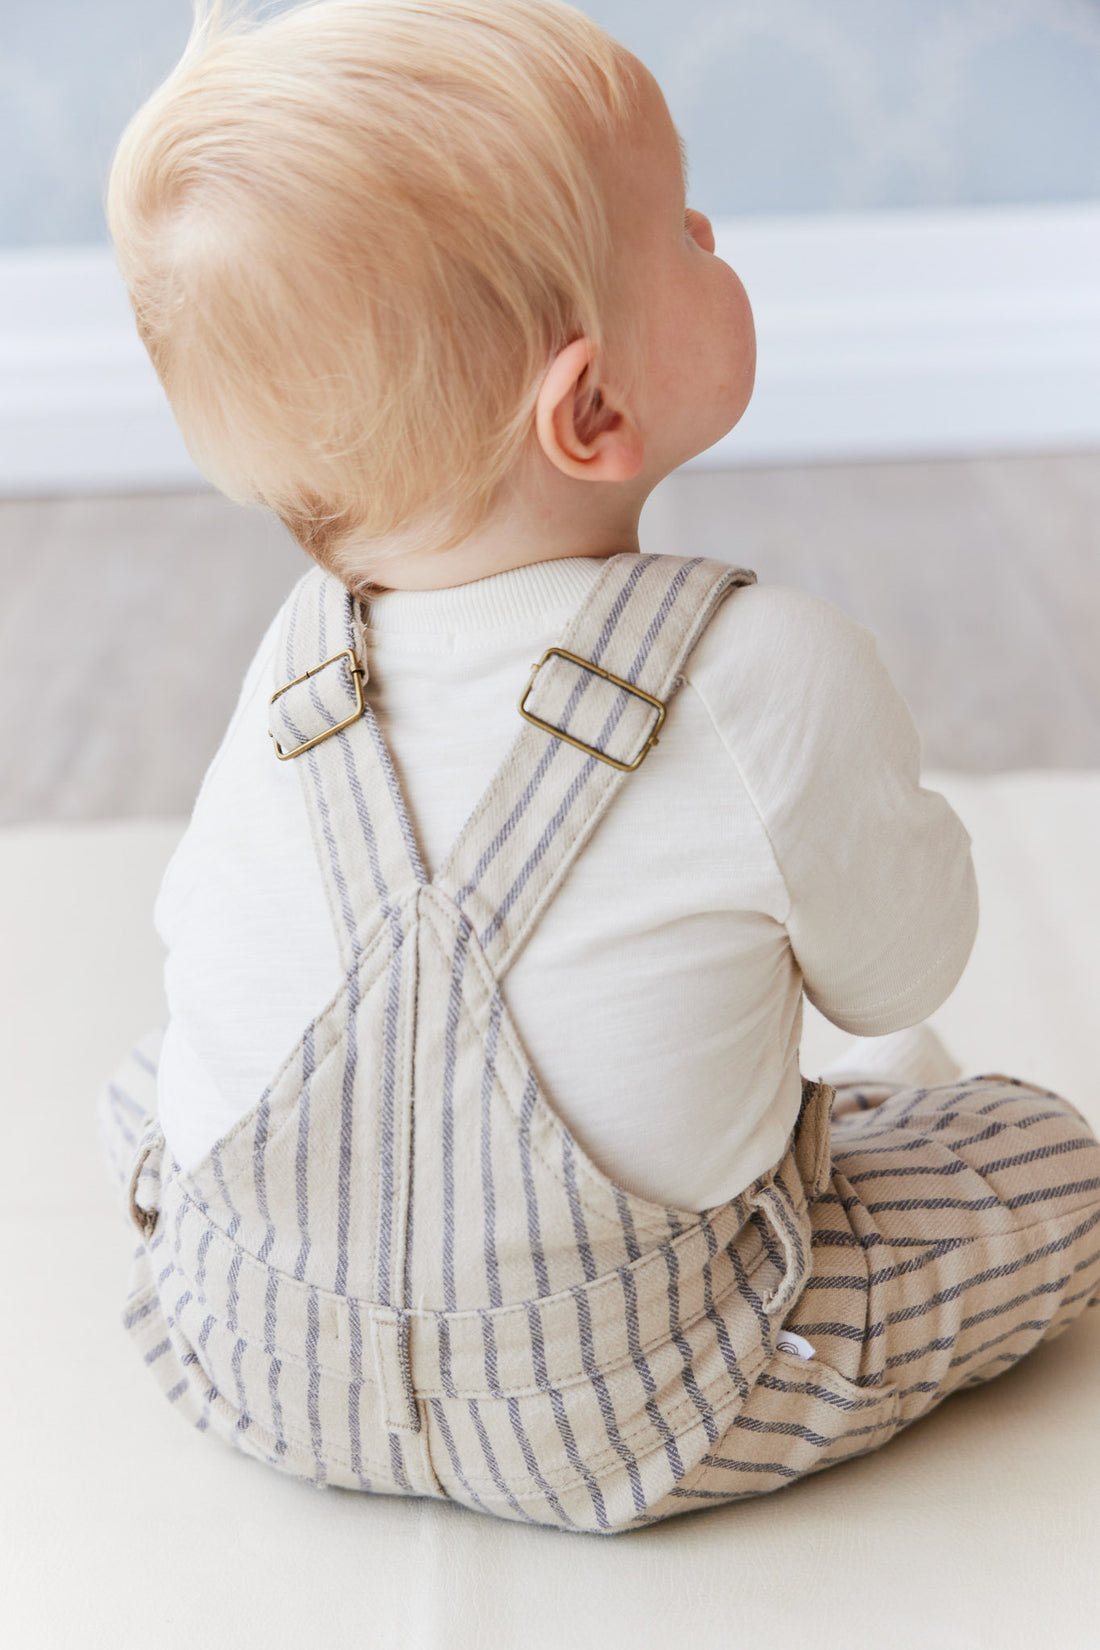 Arlo Overall - Cashew/Moonstone Childrens Overall from Jamie Kay NZ